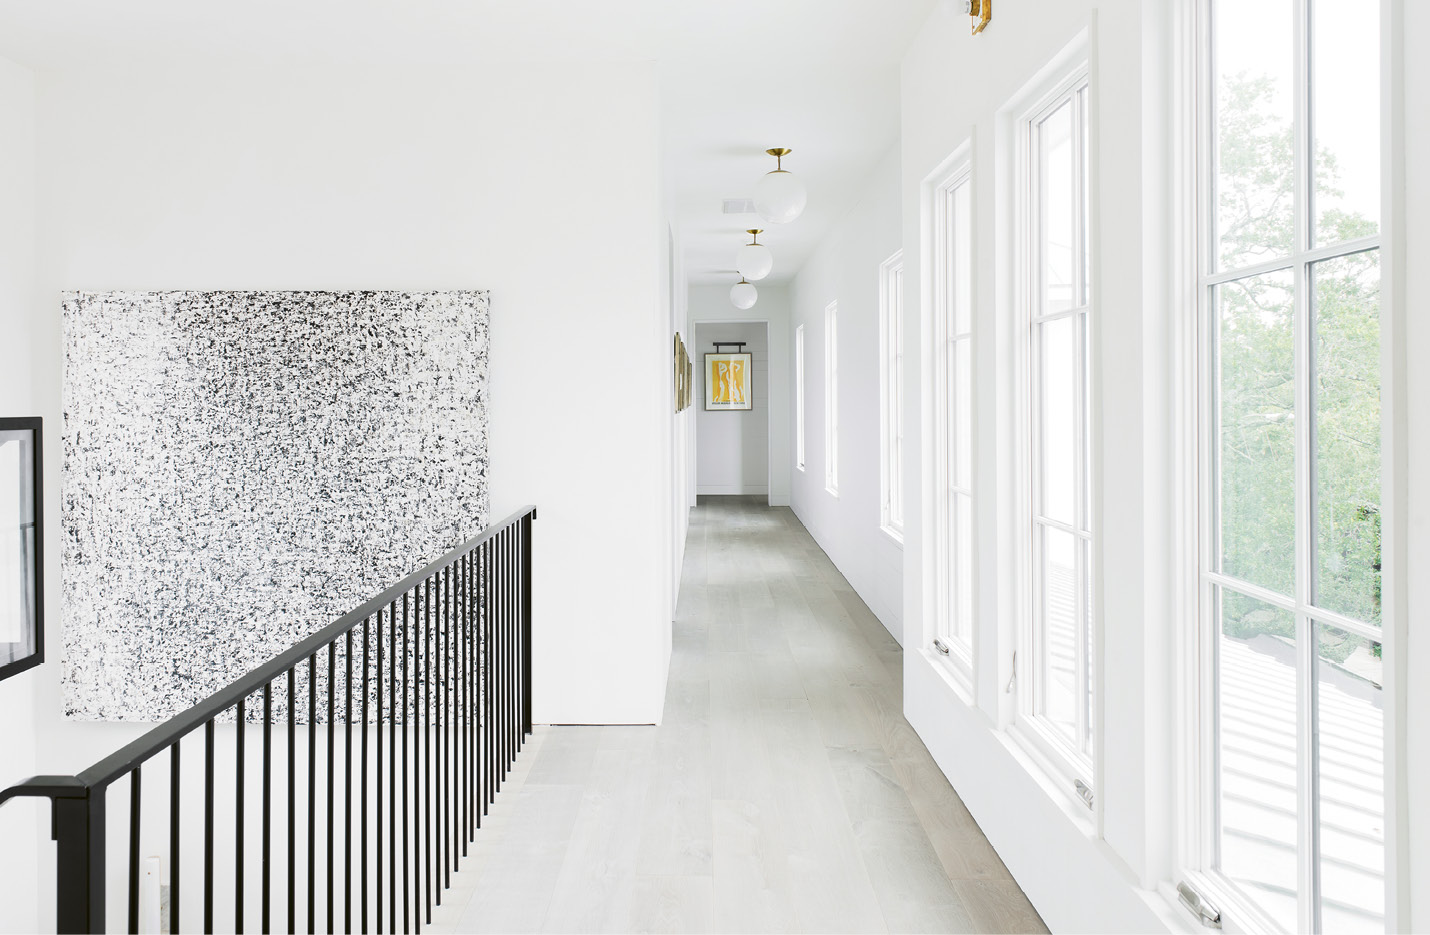 A custom black-and-white piece by Belgian artist Sabine Maes makes a statement in the upstairs hallway.